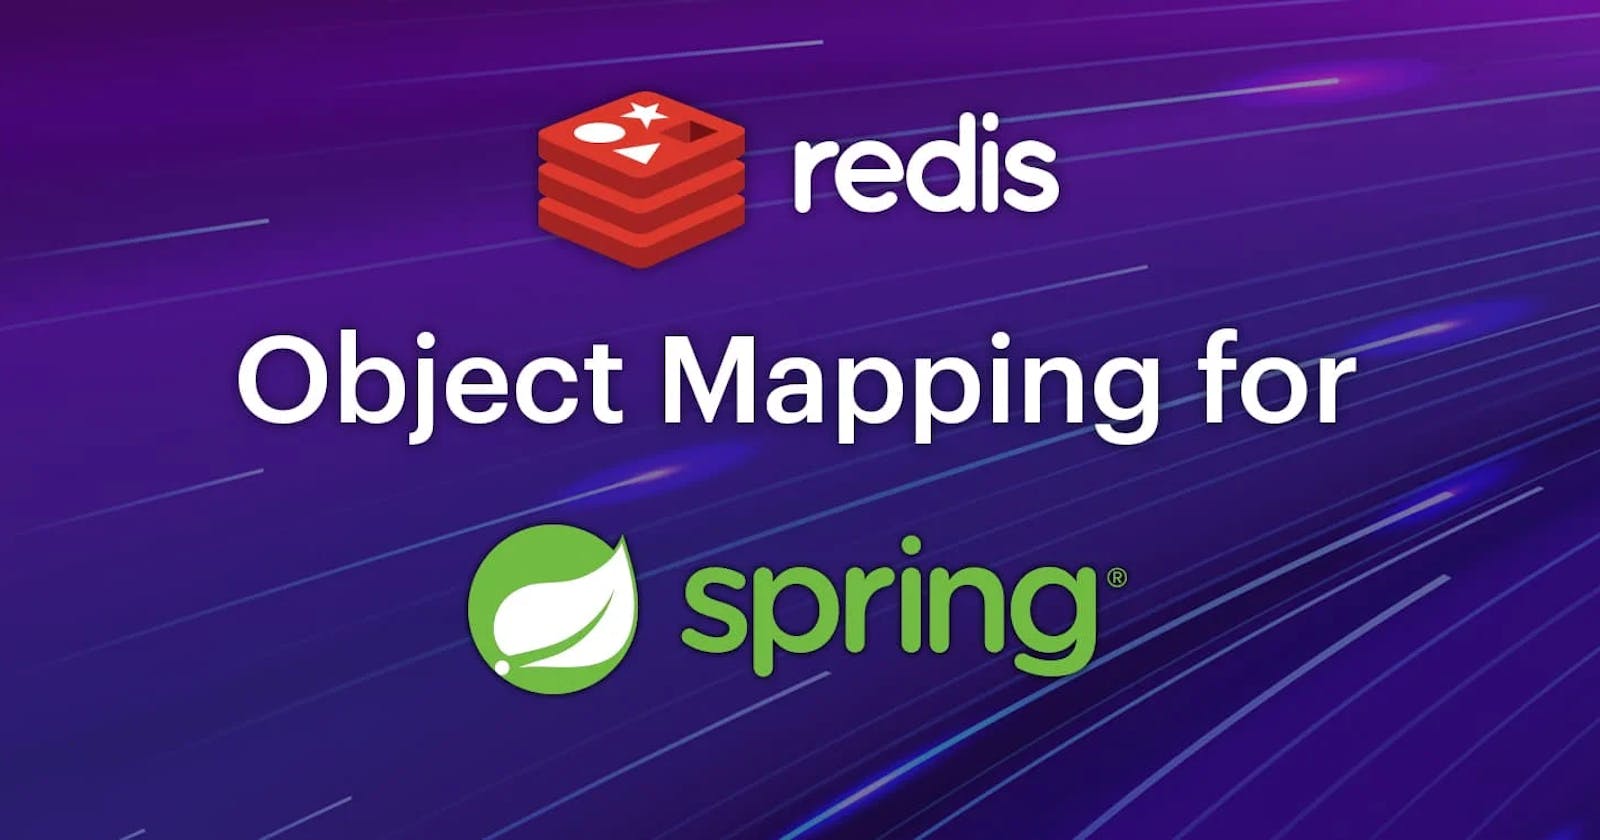 Redis OM (Recommended Spring library for Redis stack)